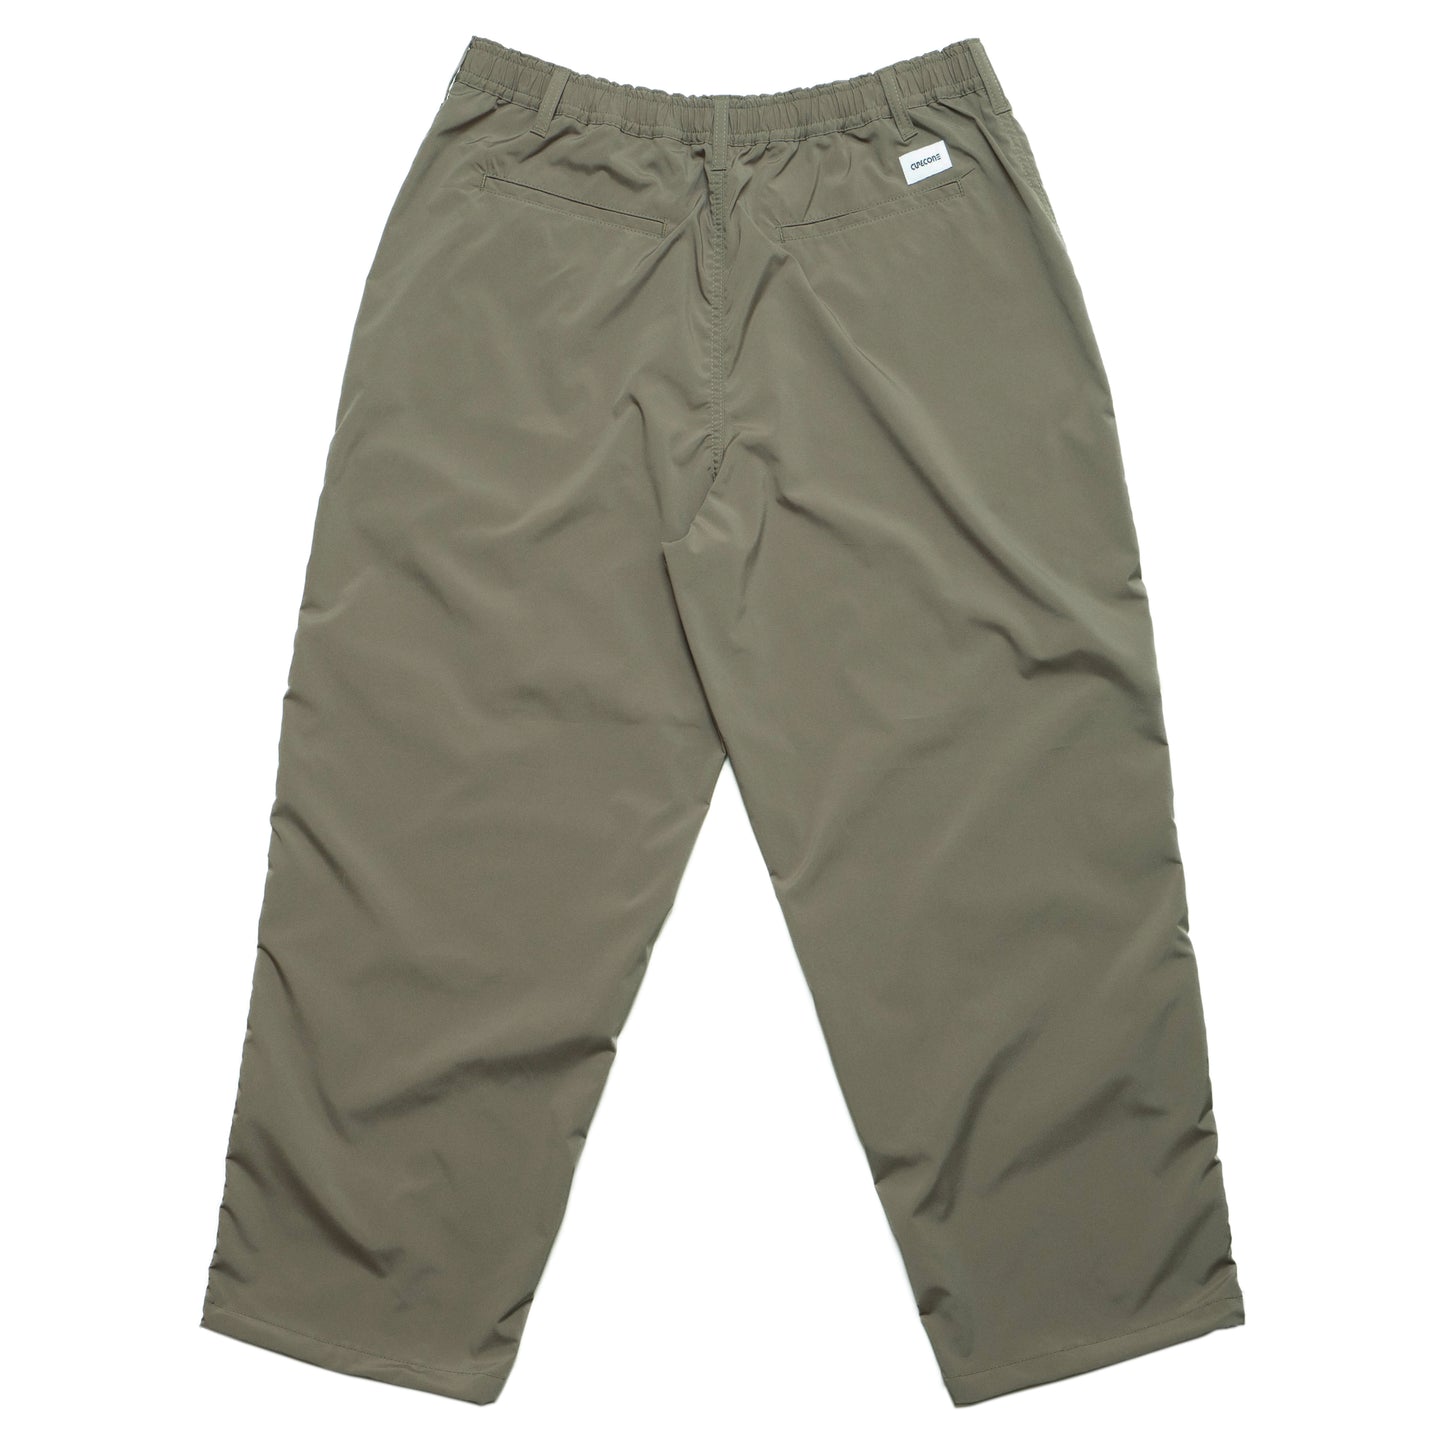 Solotex Baggy Pants - Toupe